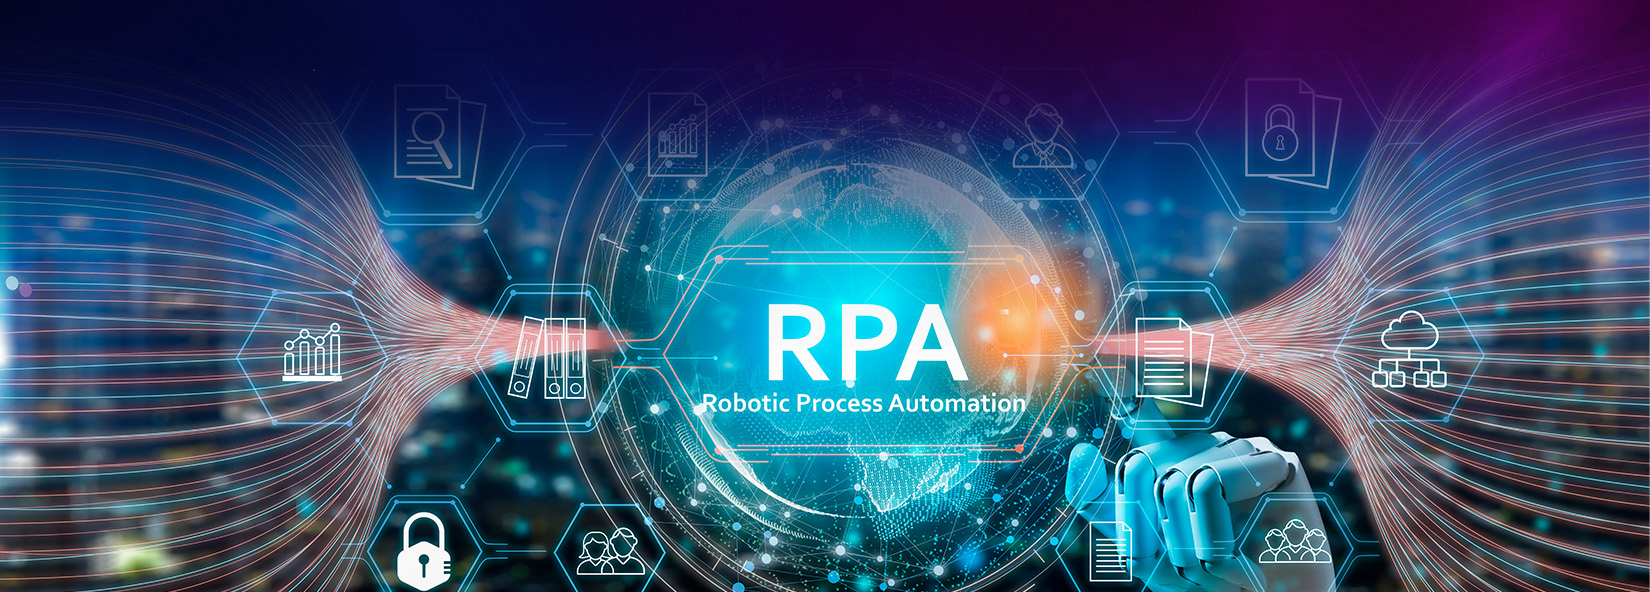 How to Use RPA in IT Departments 